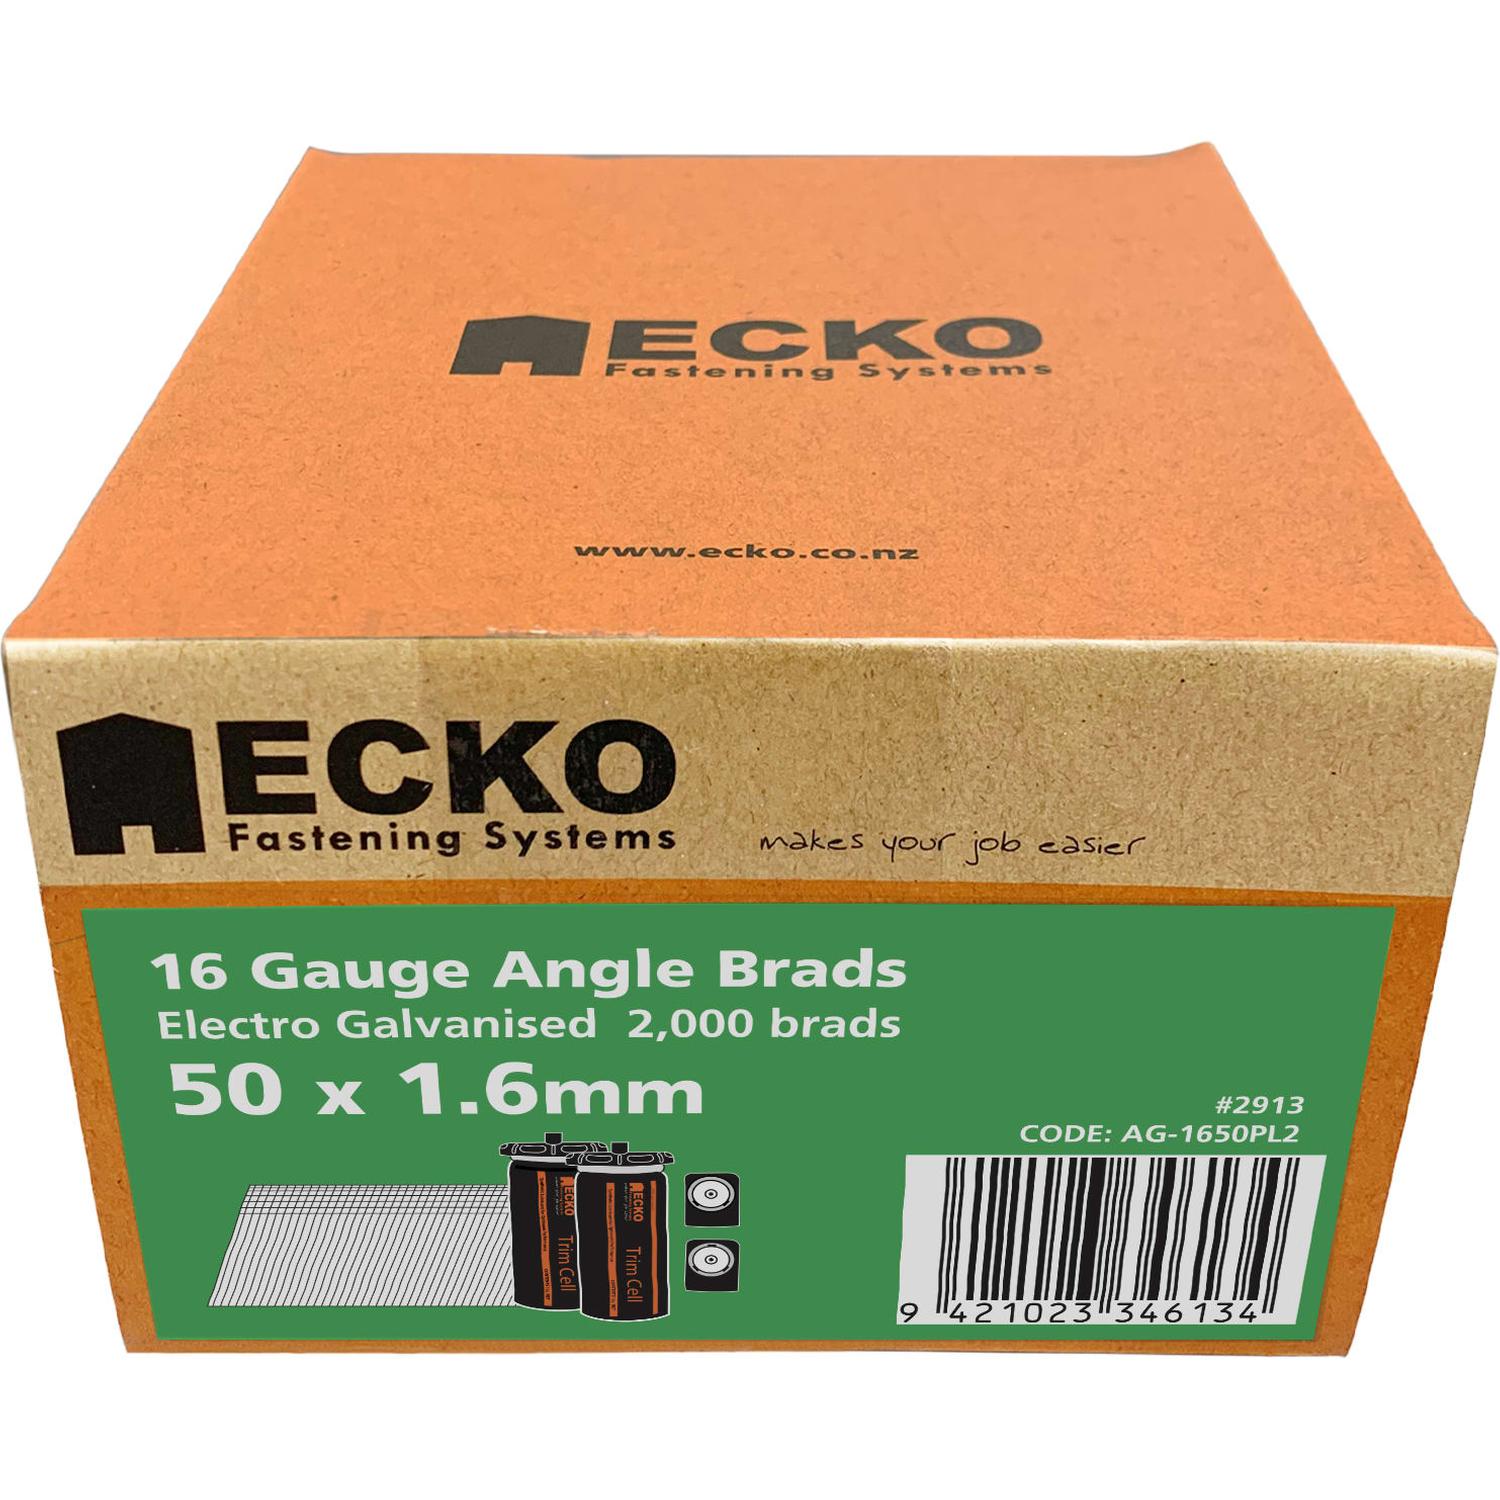 Ecko 16 Gauge Angle Brads Gas Pack 50 X 1.6Mm Electro Galvanised (2000)